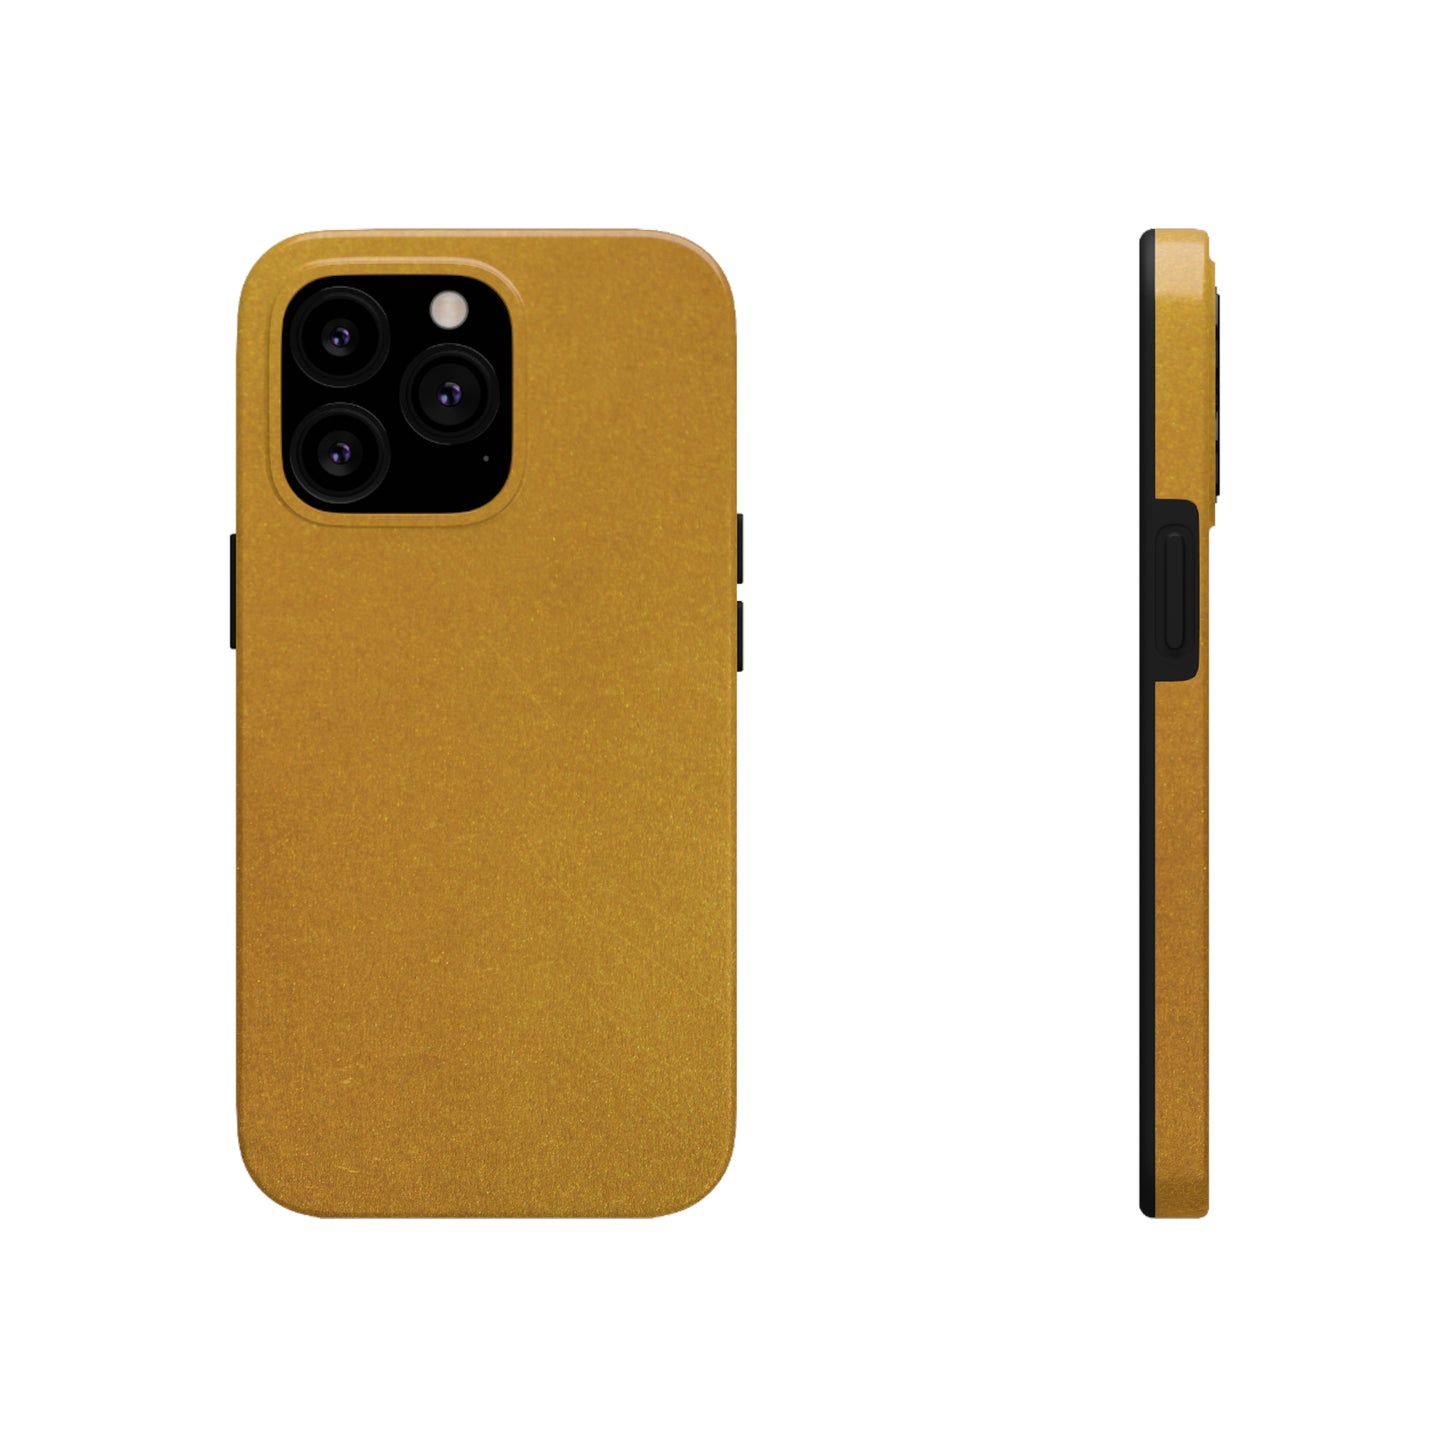 Distressed Gold Tough iPhone Cases